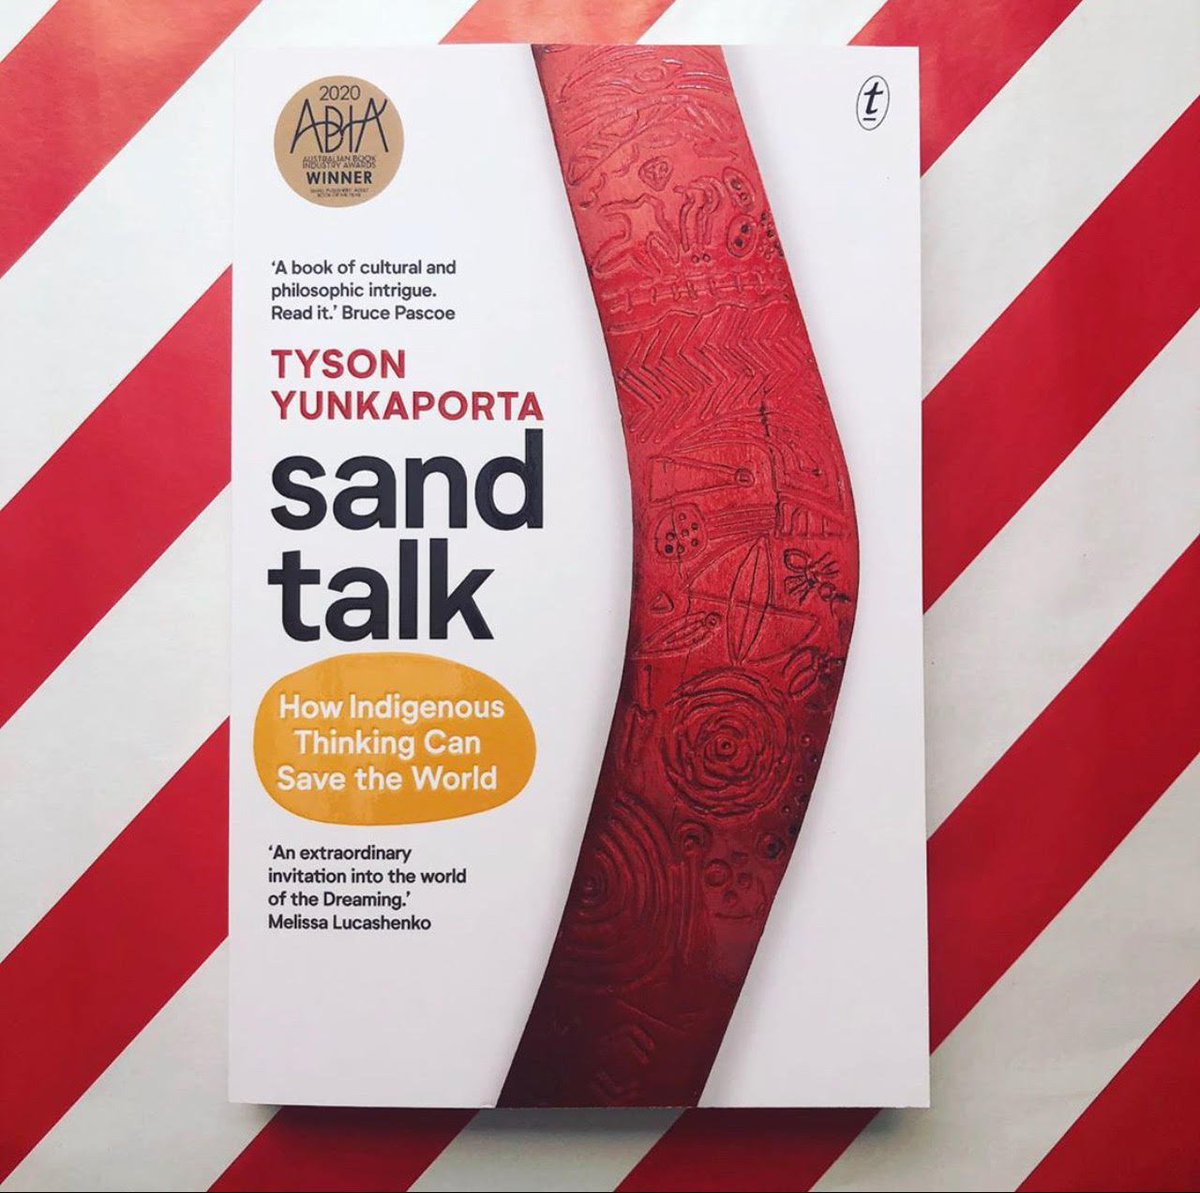 Sand Talk, by Tyson Yunkaporta  @text_publishing I really enjoyed Yunkaporta's authorial voice and the relentless focus, as he describes it, on the “how” of Aboriginal and other indigenous thought systems rather than the superficial, product-oriented “what”.